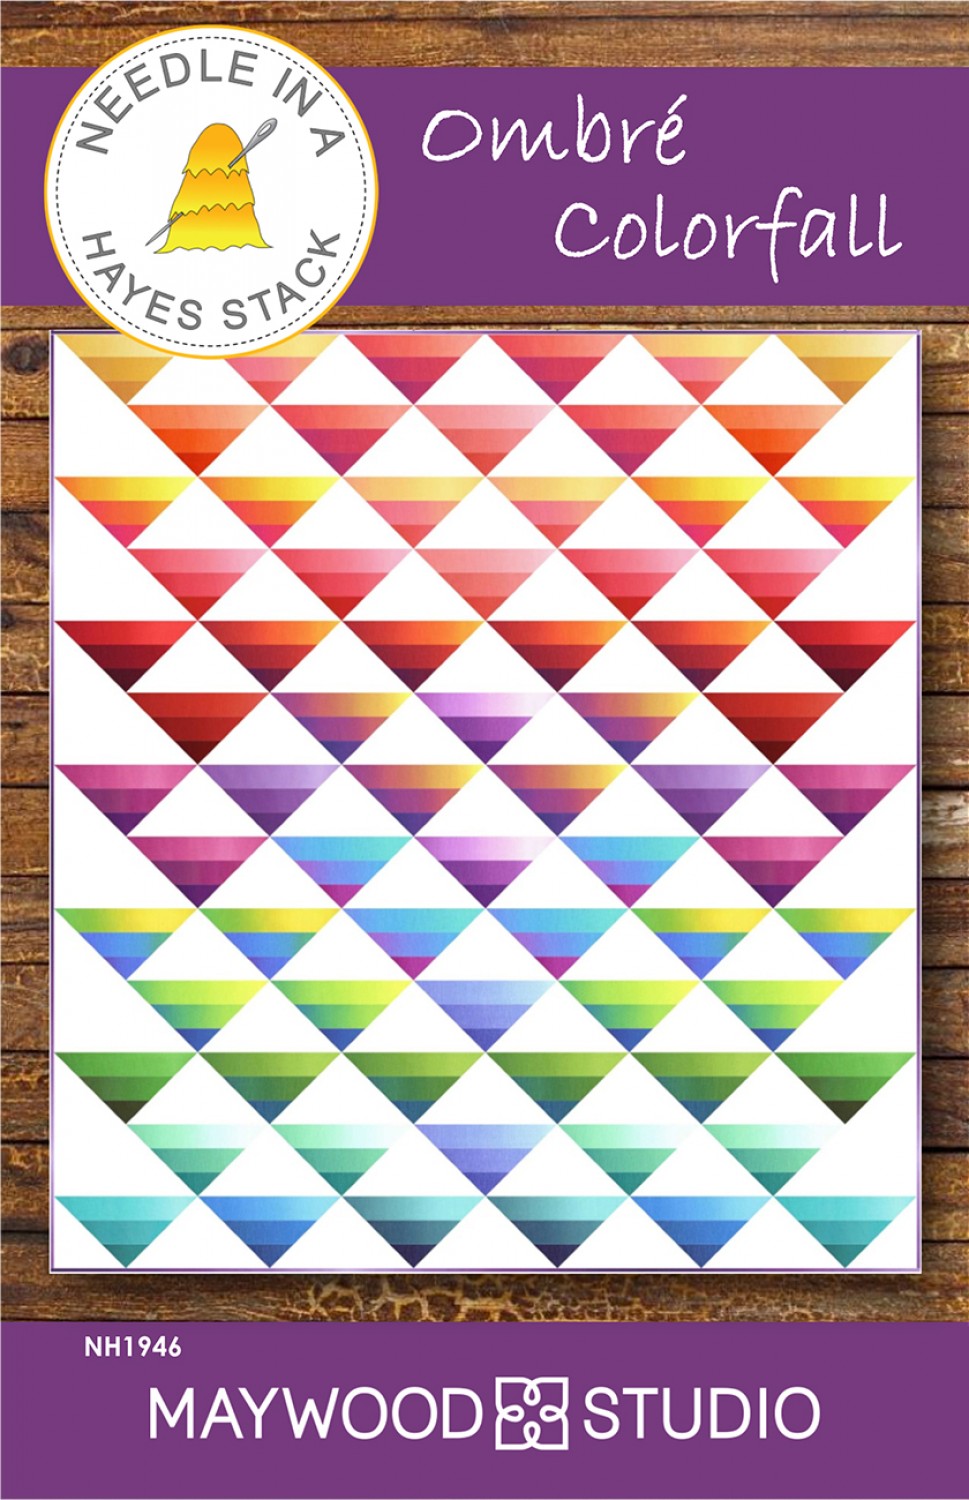 Ombre Colorfall Quilt Pattern